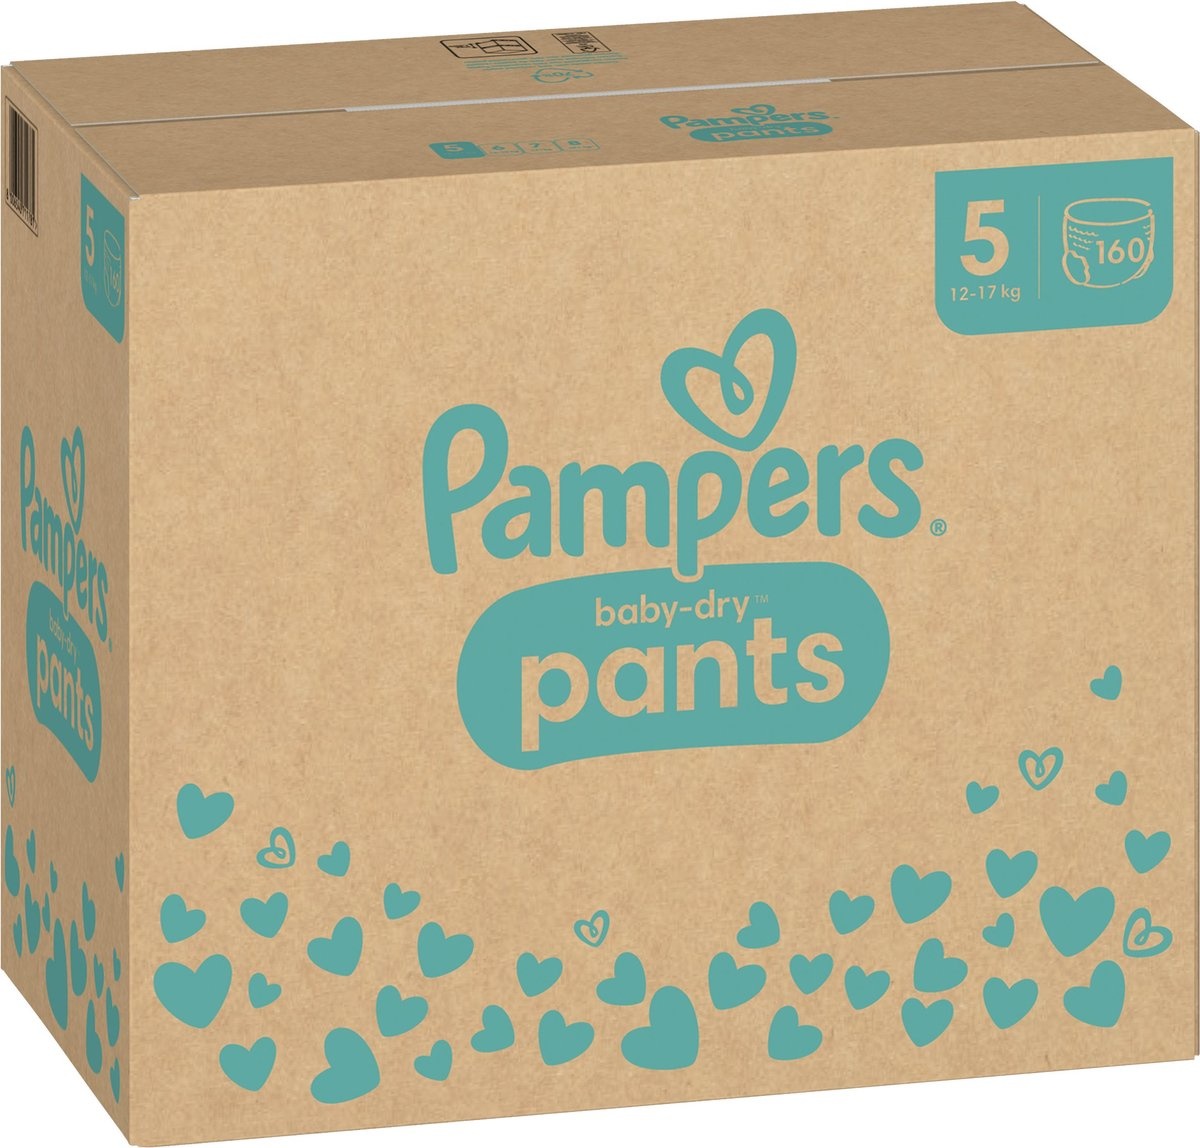 Pampers Baby-Dry Pants - Size 5 (12-17kg) -160 Diaper Pants Monthly Box - Packaging damaged